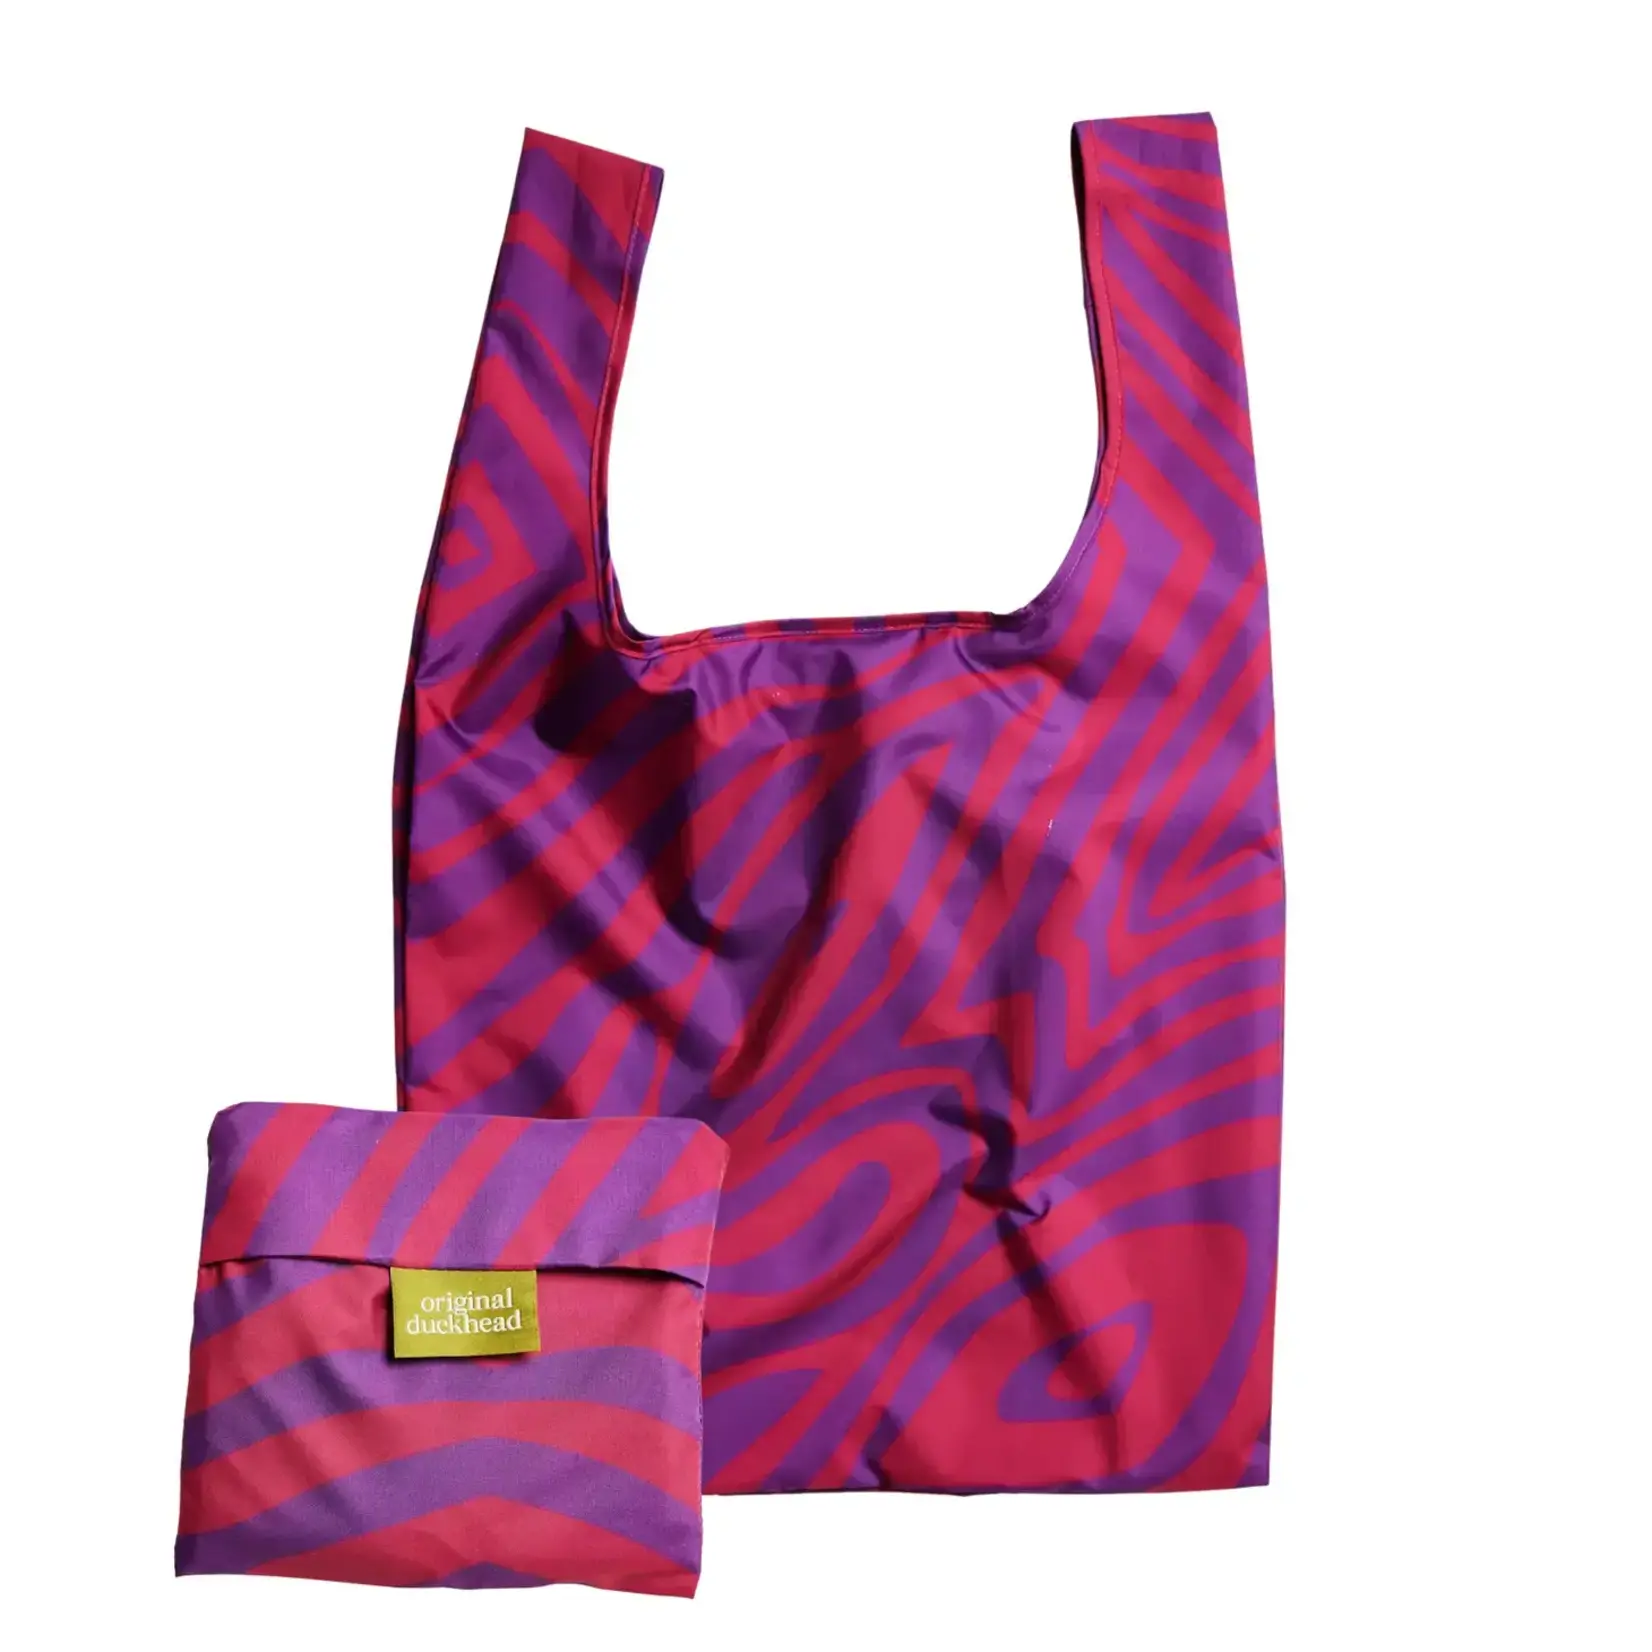 Swirl in Pink Reusable Eco Friendly Bag